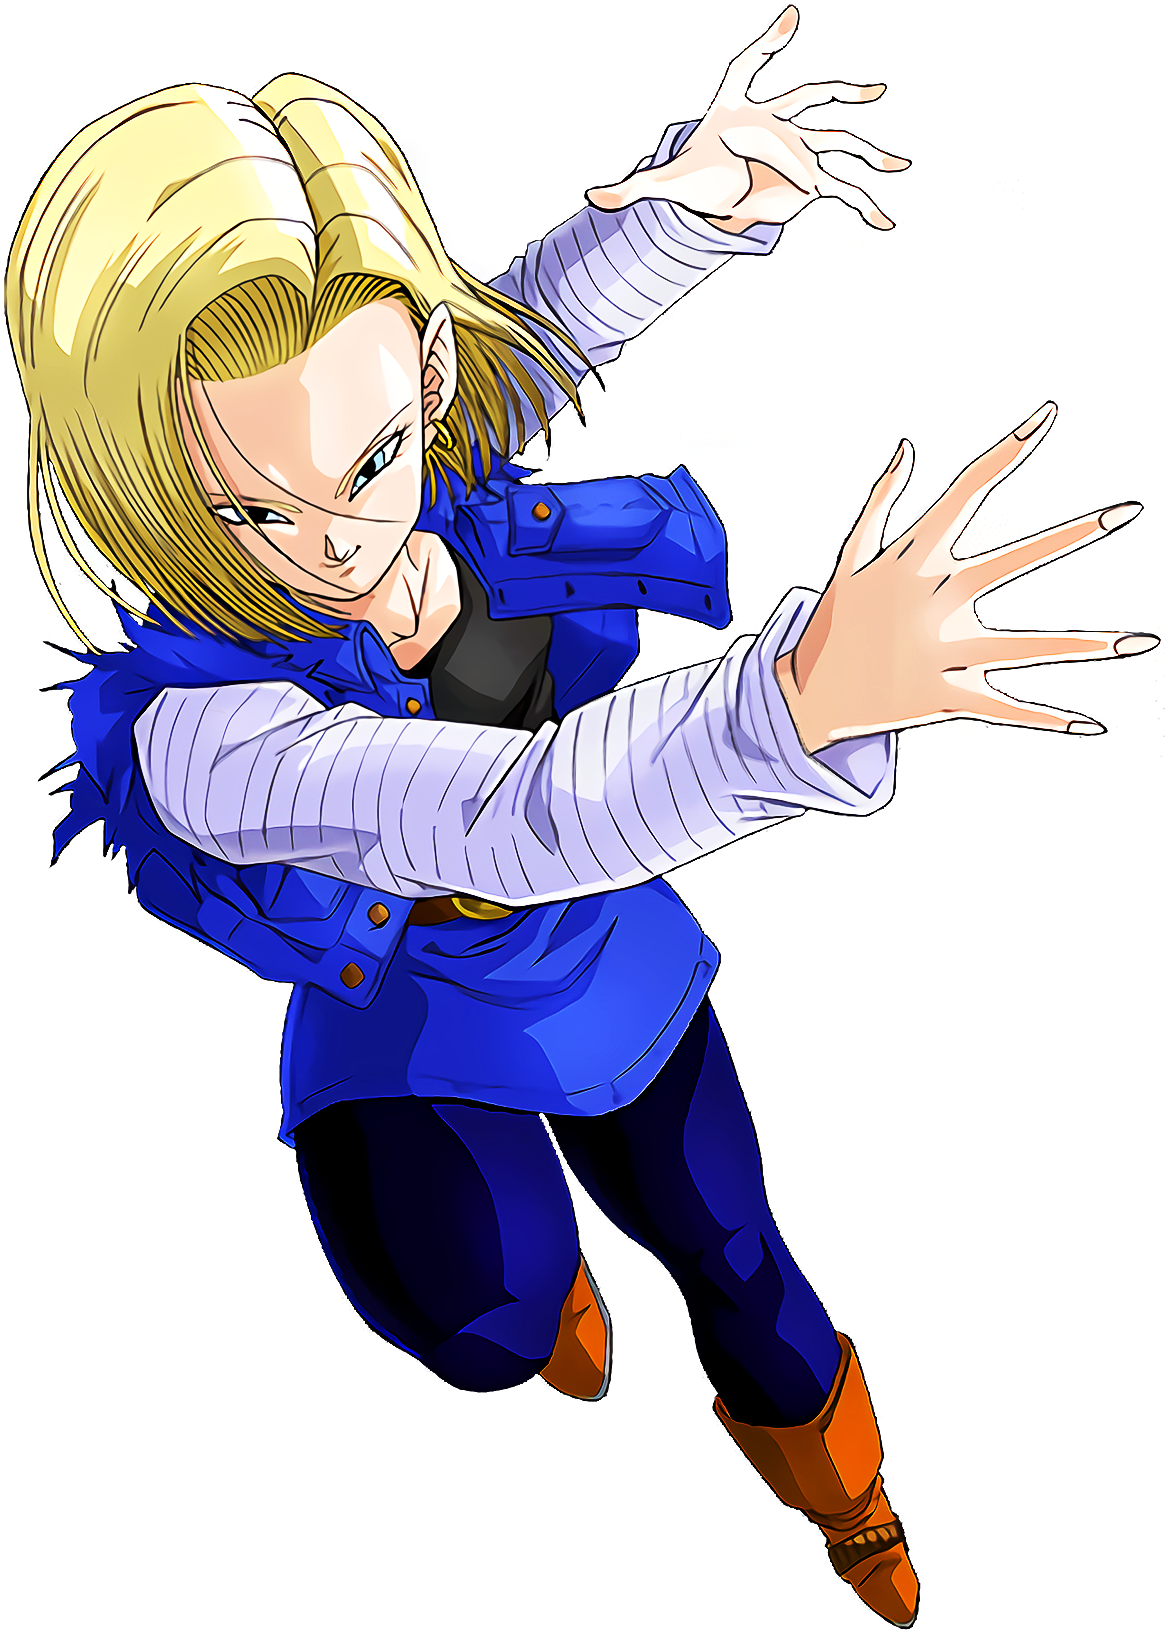 Dragon Ball Super: Super Hero Unveils Android 18's New Look